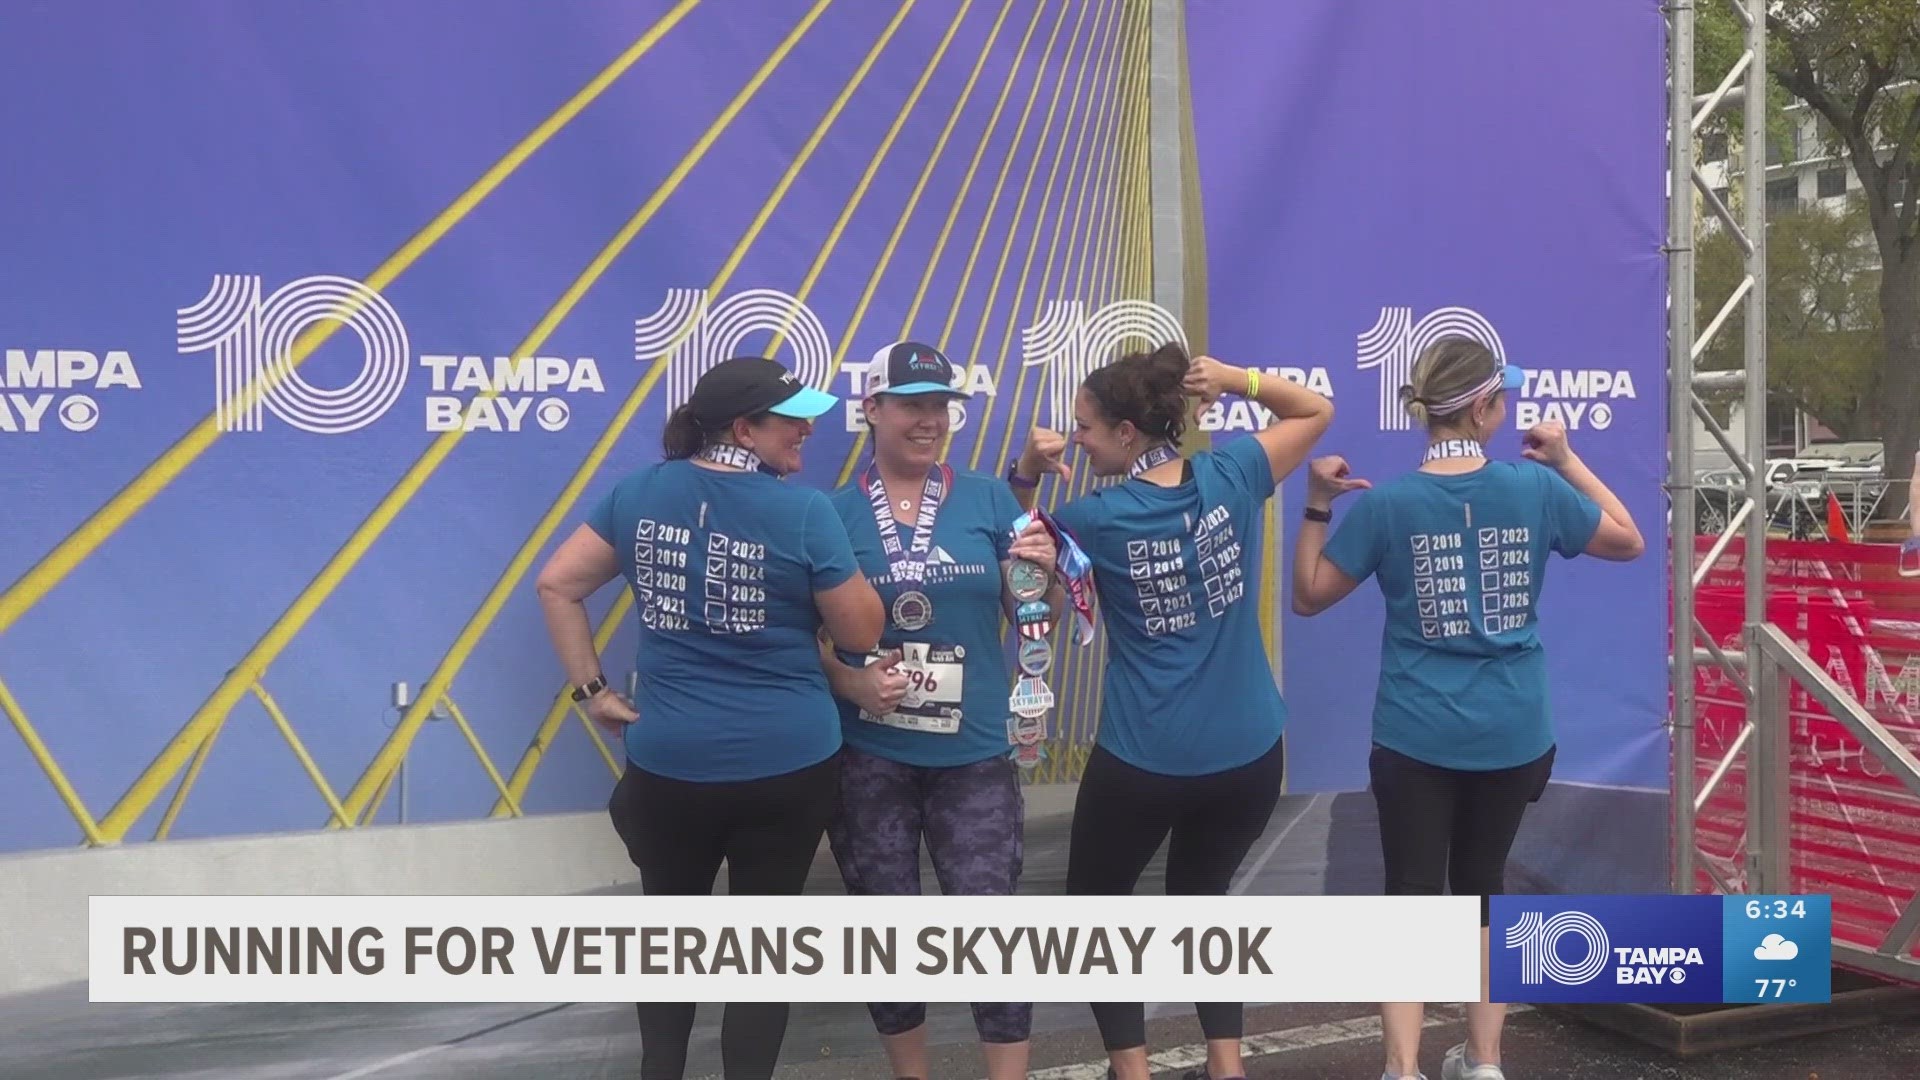 Participants ran across three counties, all in support of veterans.